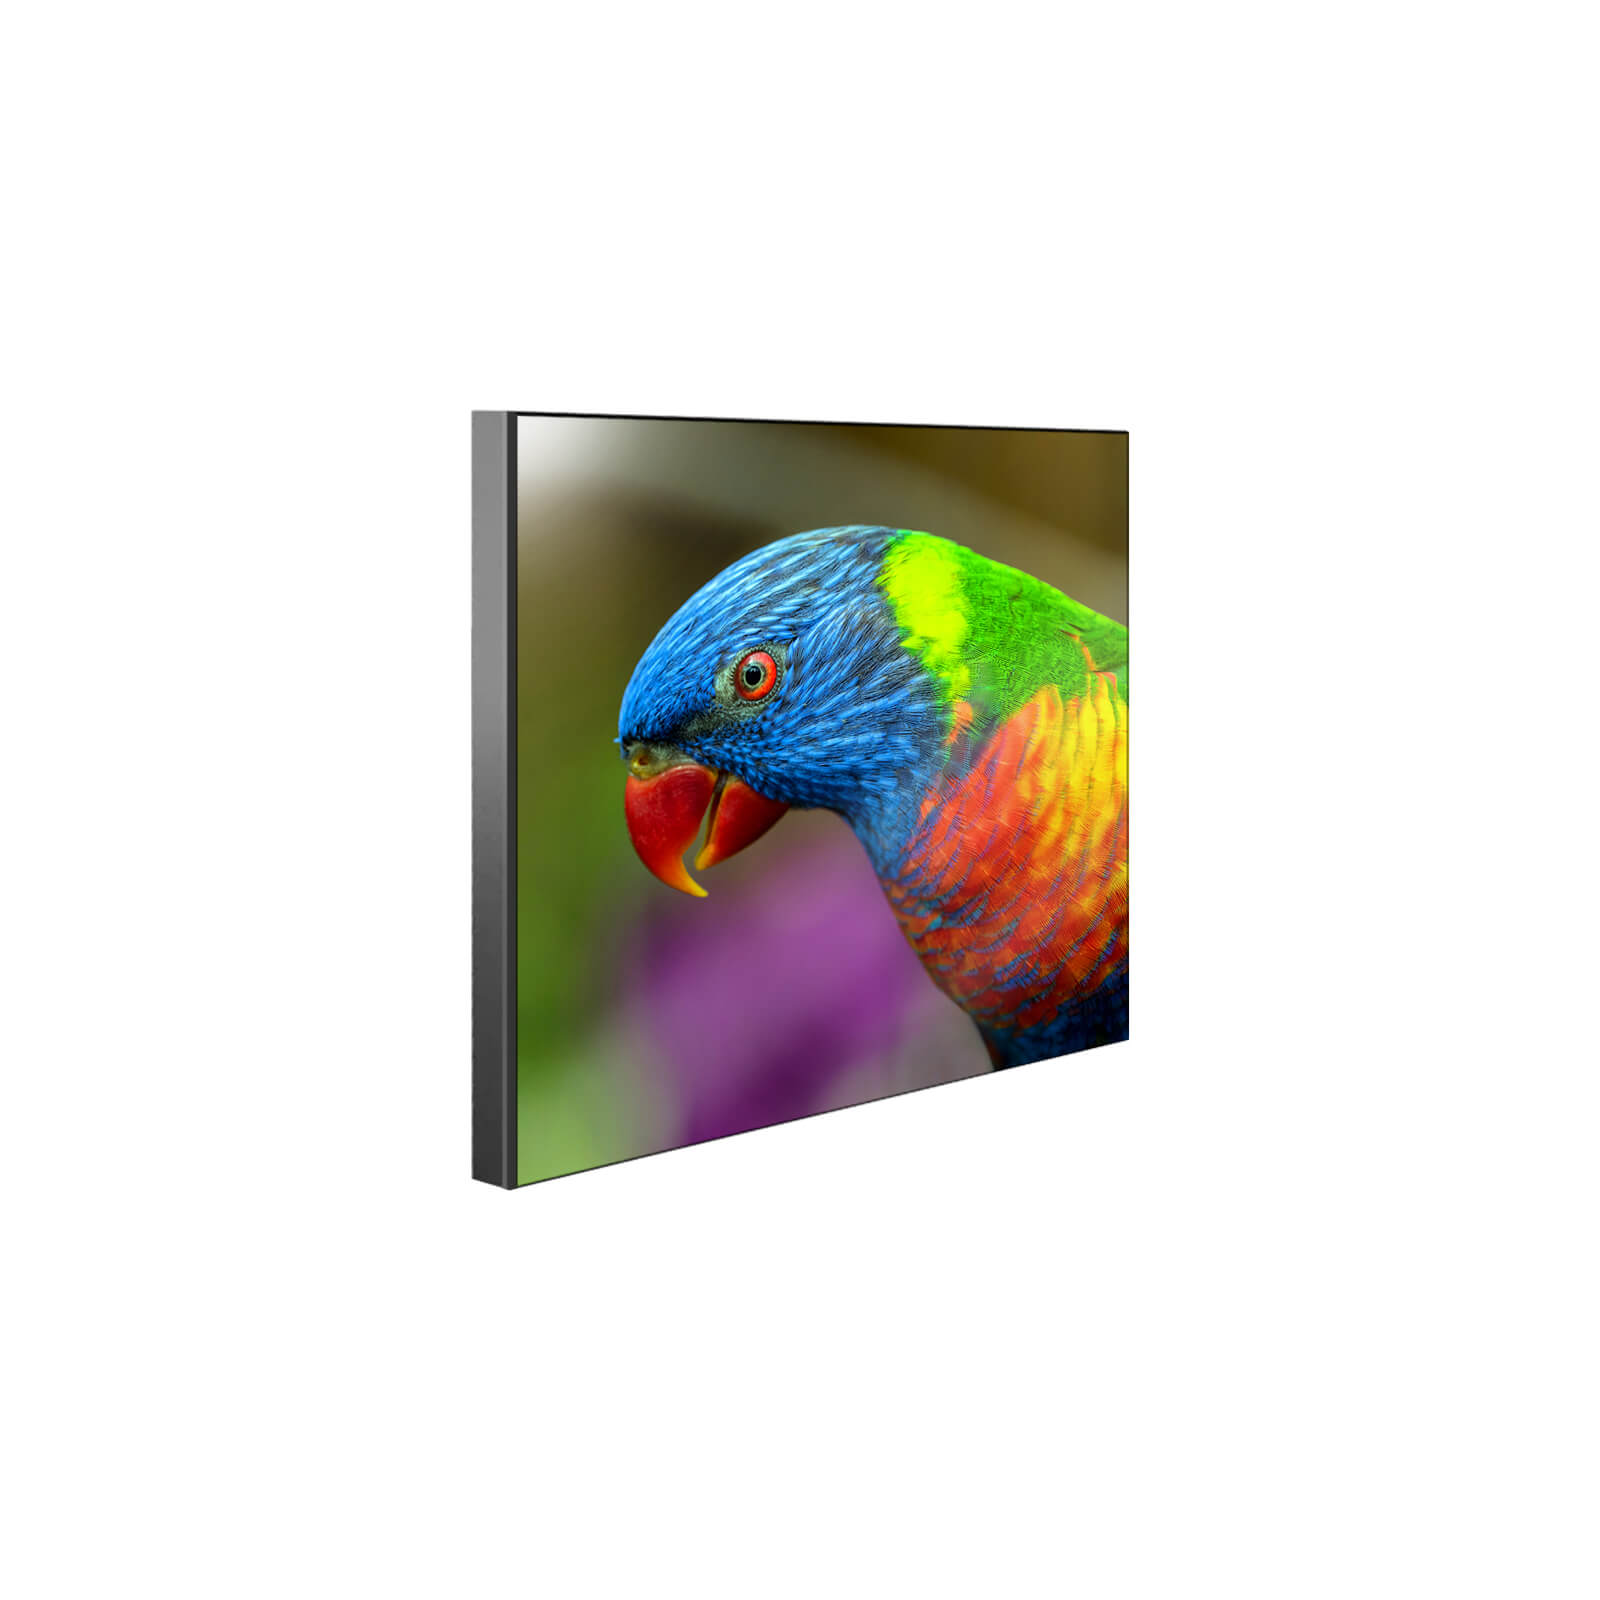 ChromaLuxe Chamfer Sublimation Wall Panel with Black Edge Parrot